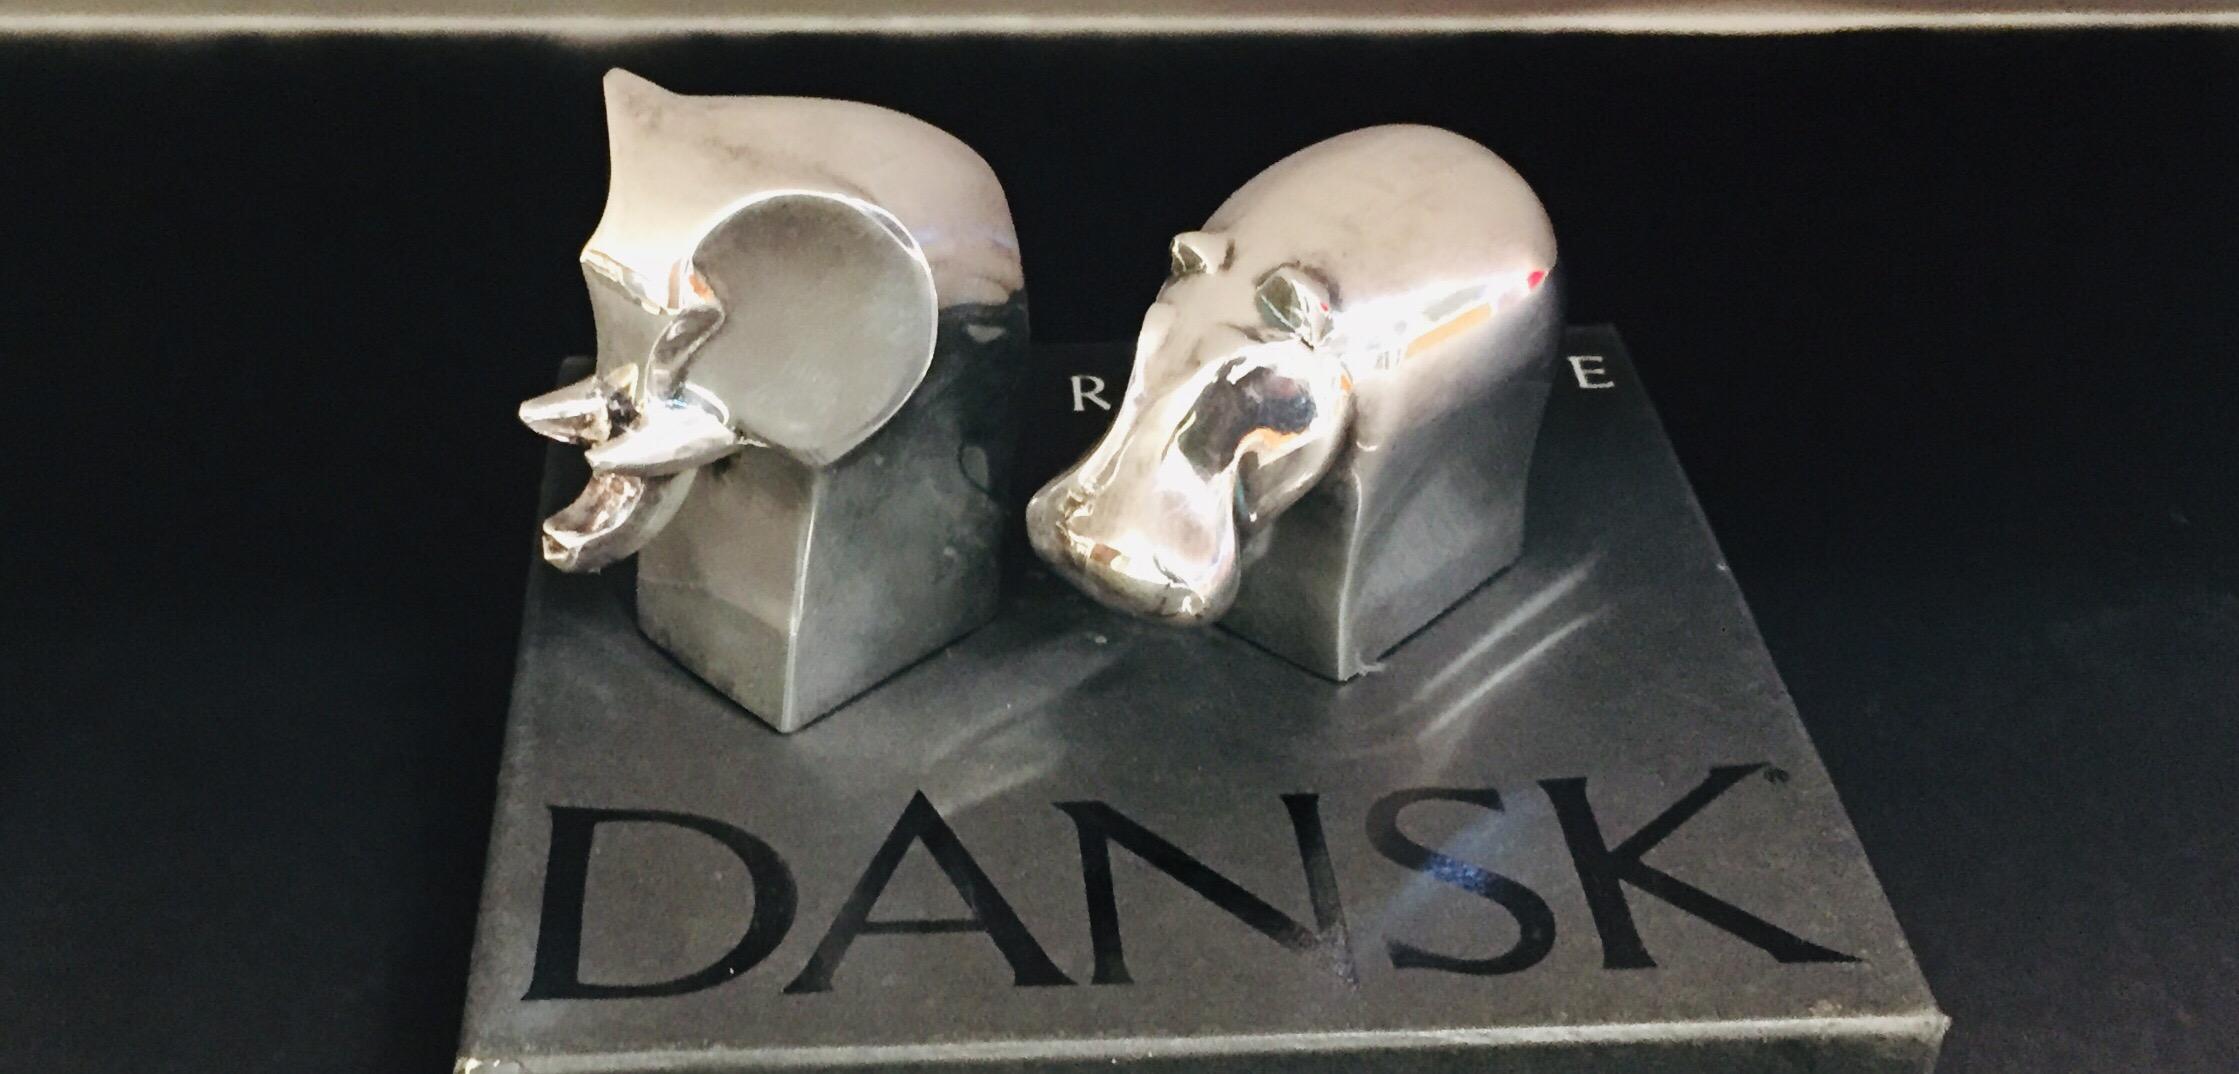 1970s Gunnar Cyren designed for Dansk paperweight silver plated, elephant and Hippopotamus.
Wonderful midcentury set of two silver plated Dansk paperweights.
These decorative objects animal figurines were created exclusively for Dansk in the early